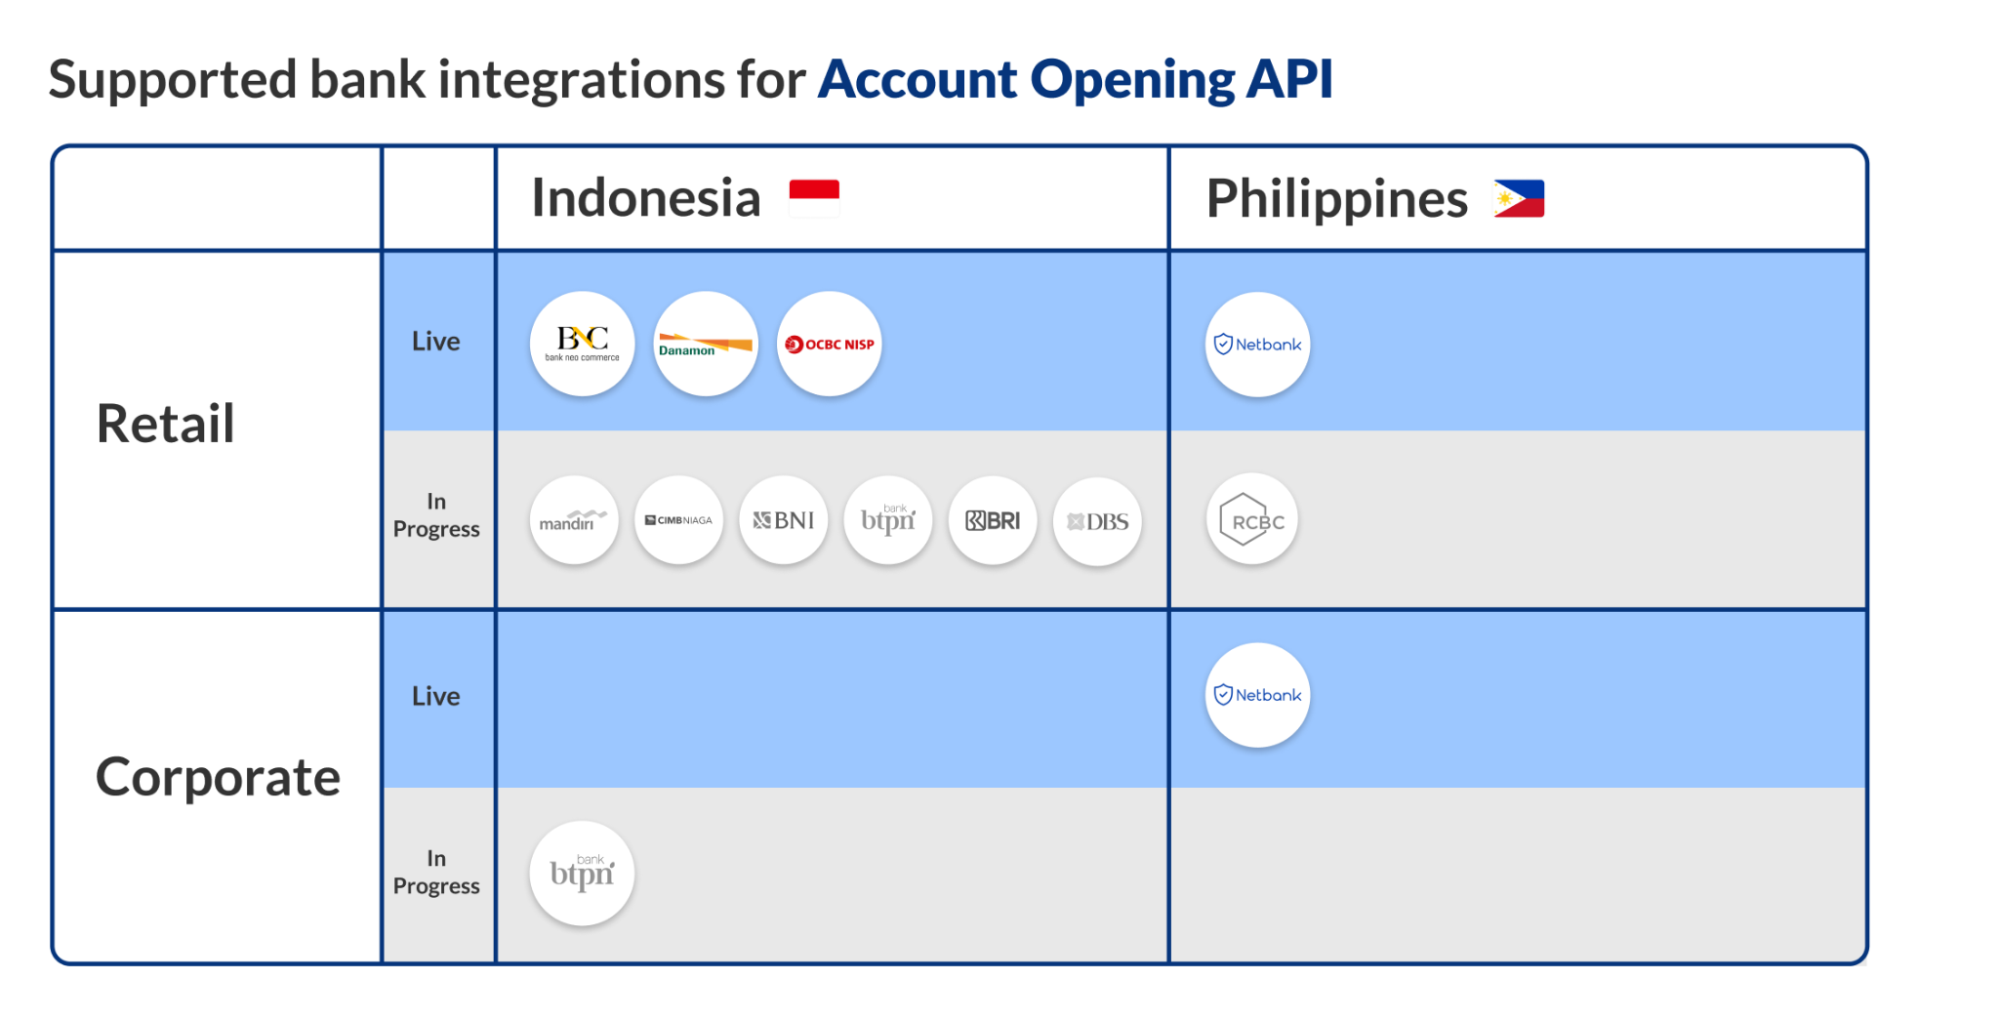 Supported bank integrations for Account Opening API